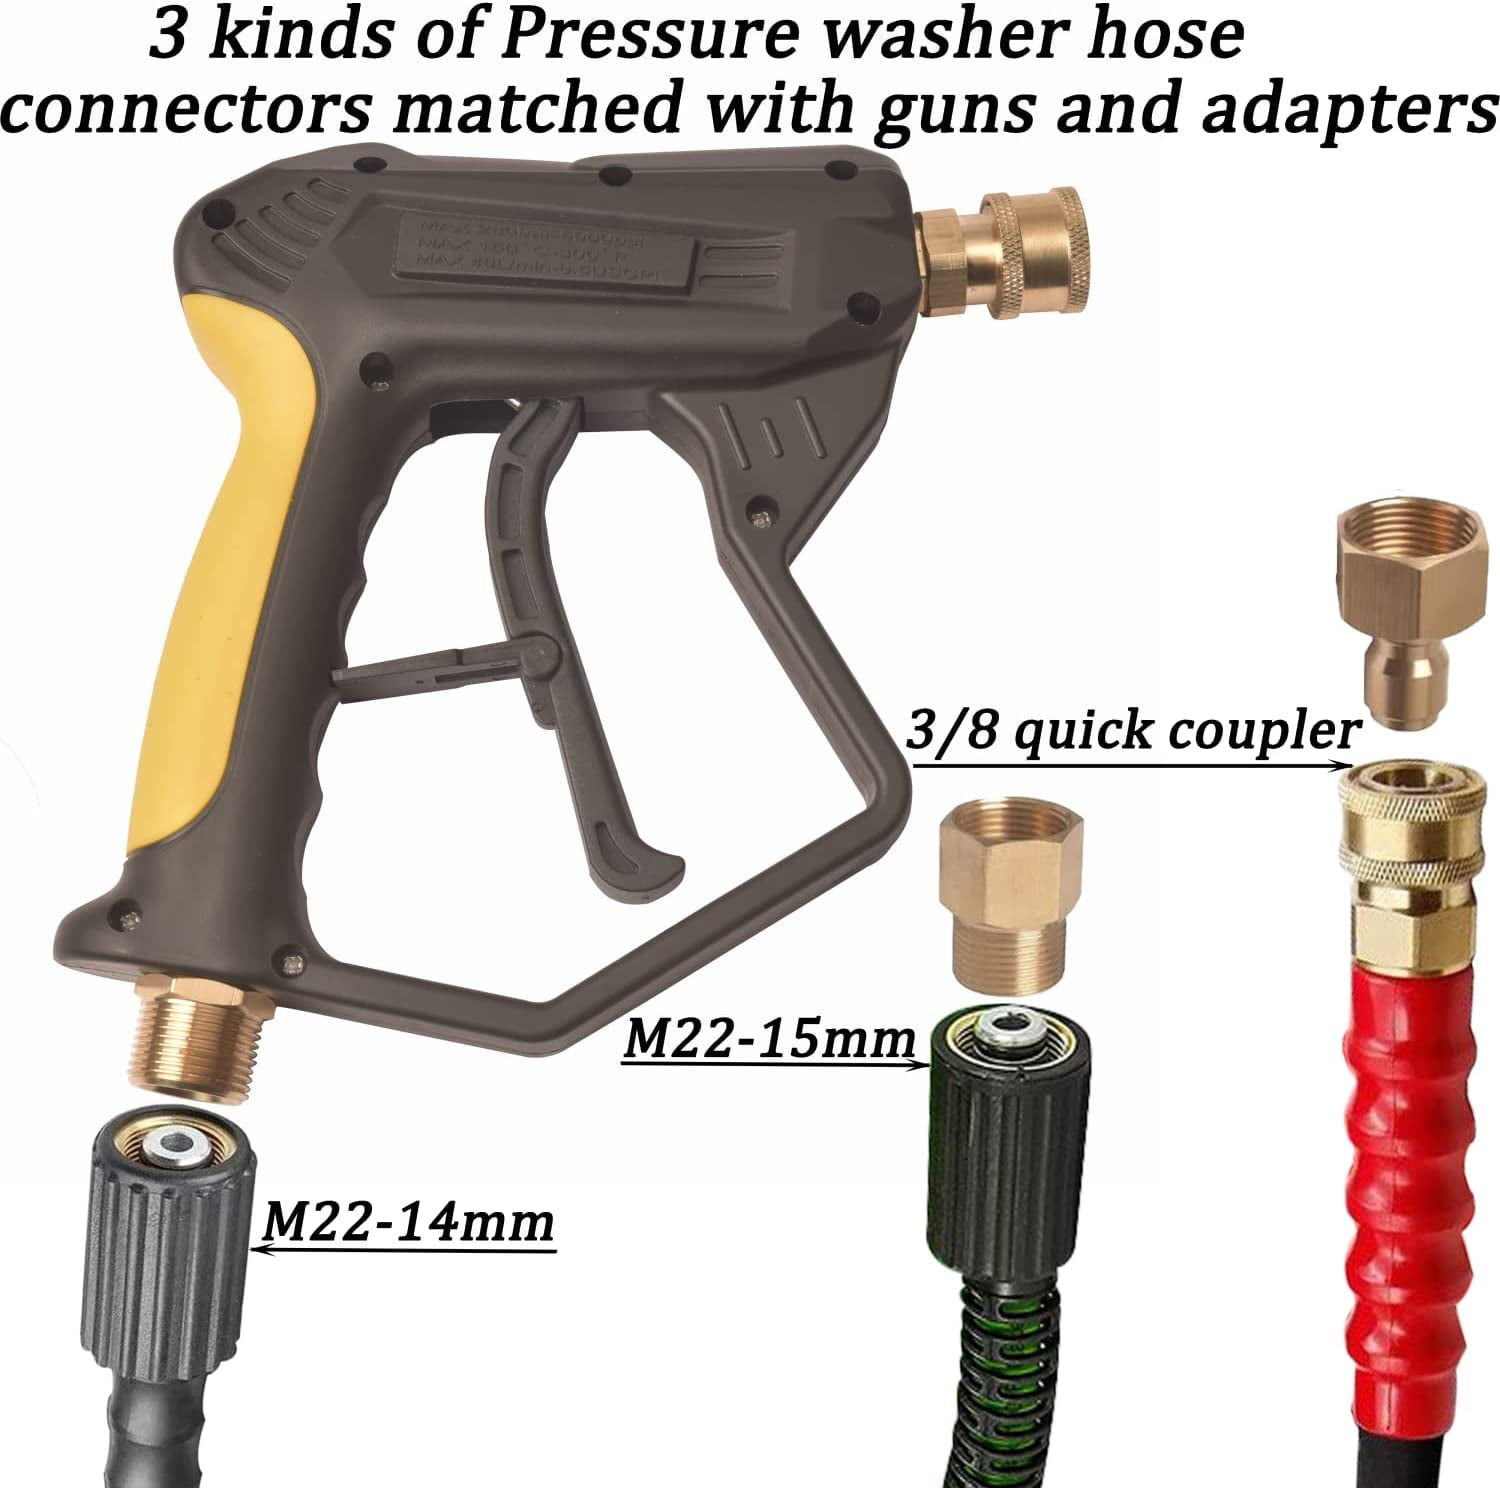 GDHXW X-887 High Pressure Washer Gun with Foam Cannon 2 Adapter 7 